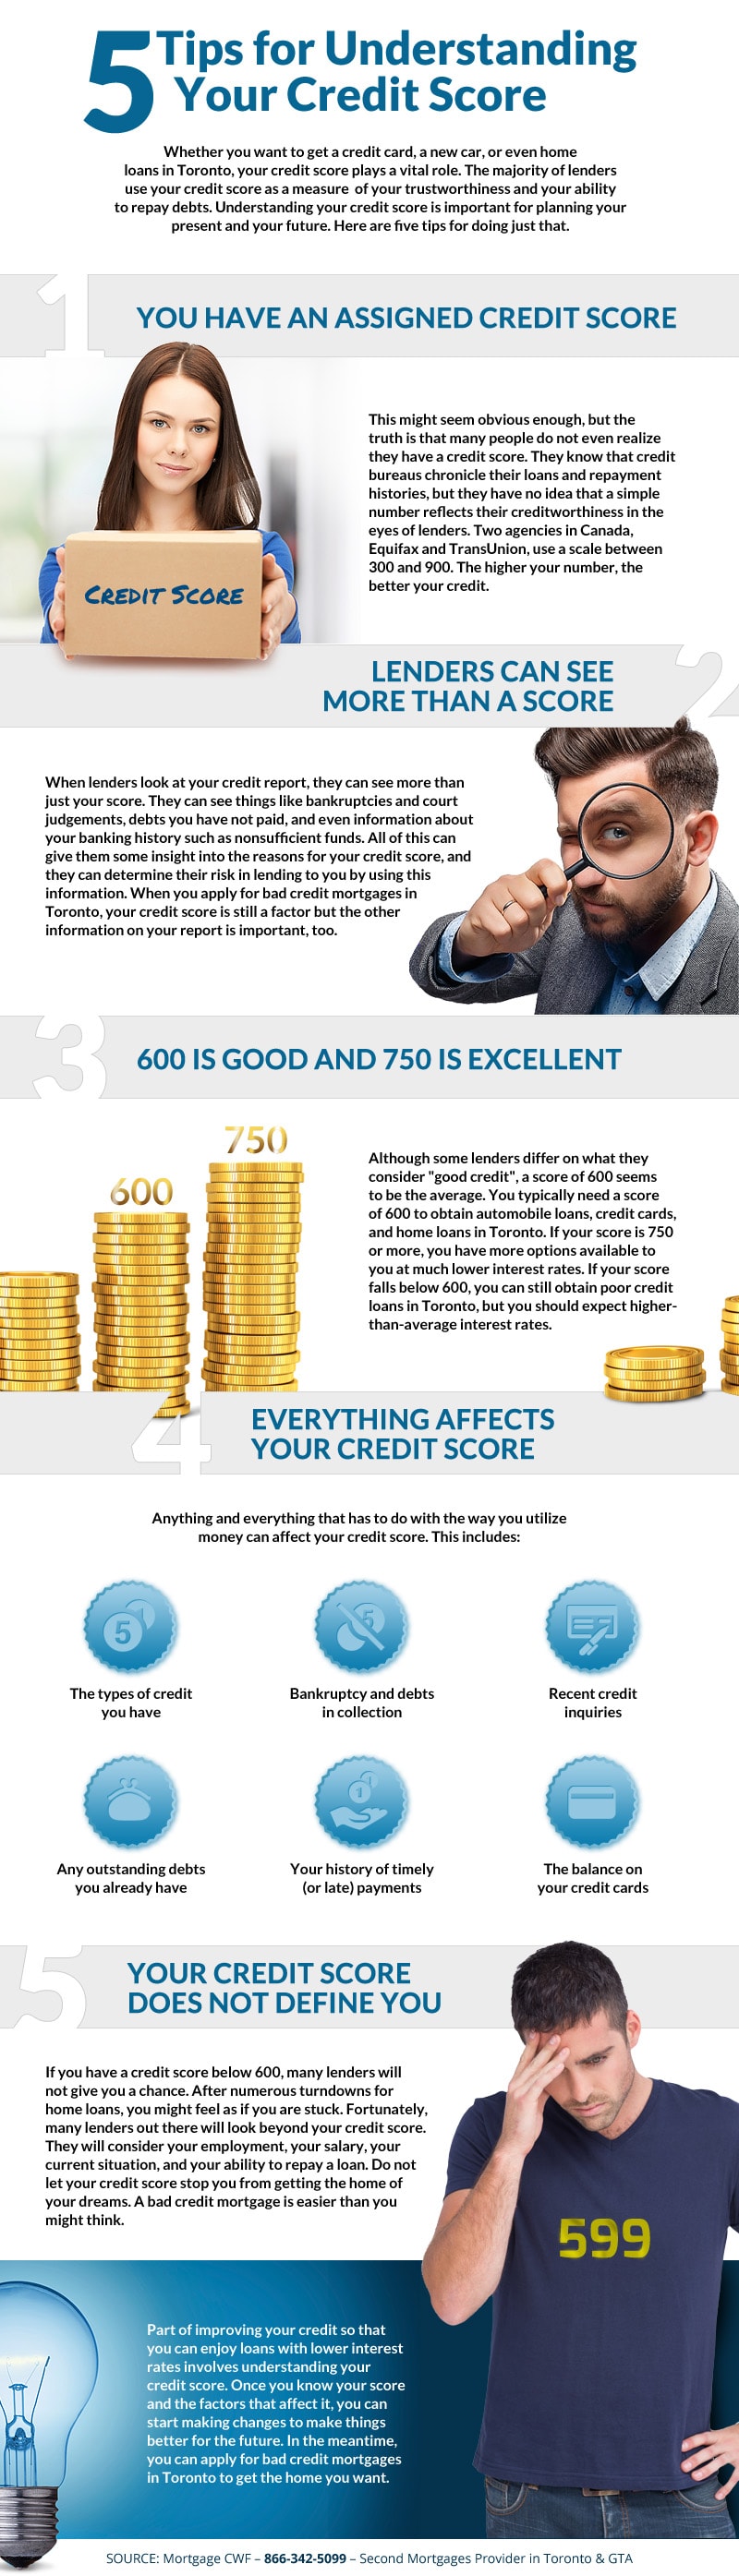 How to Understand Your Credit Score - Infographic